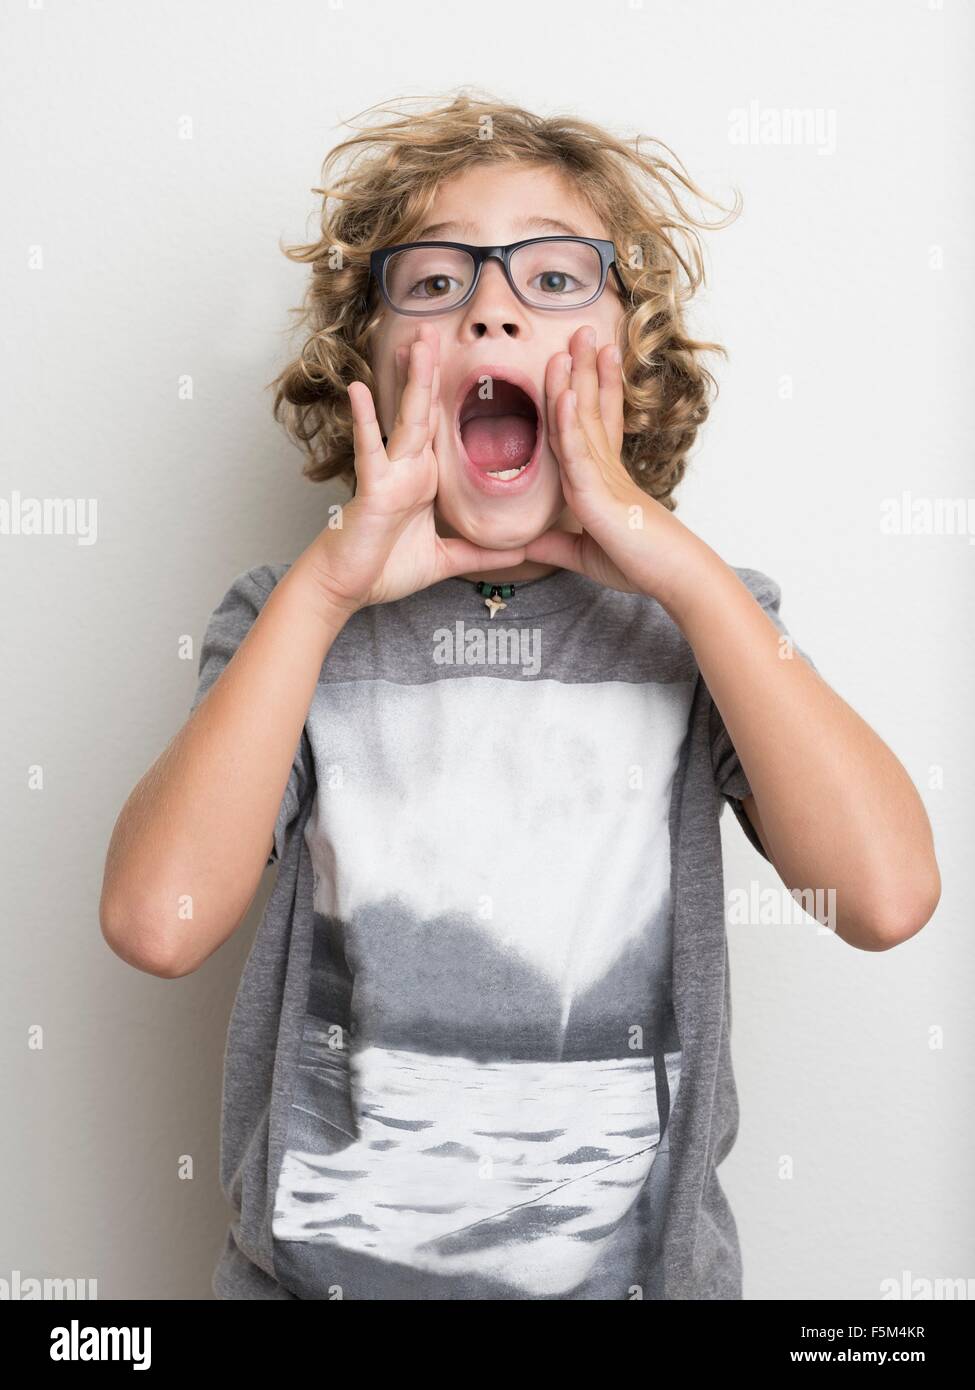 Boy shouting with hands cupping mouth Stock Photo